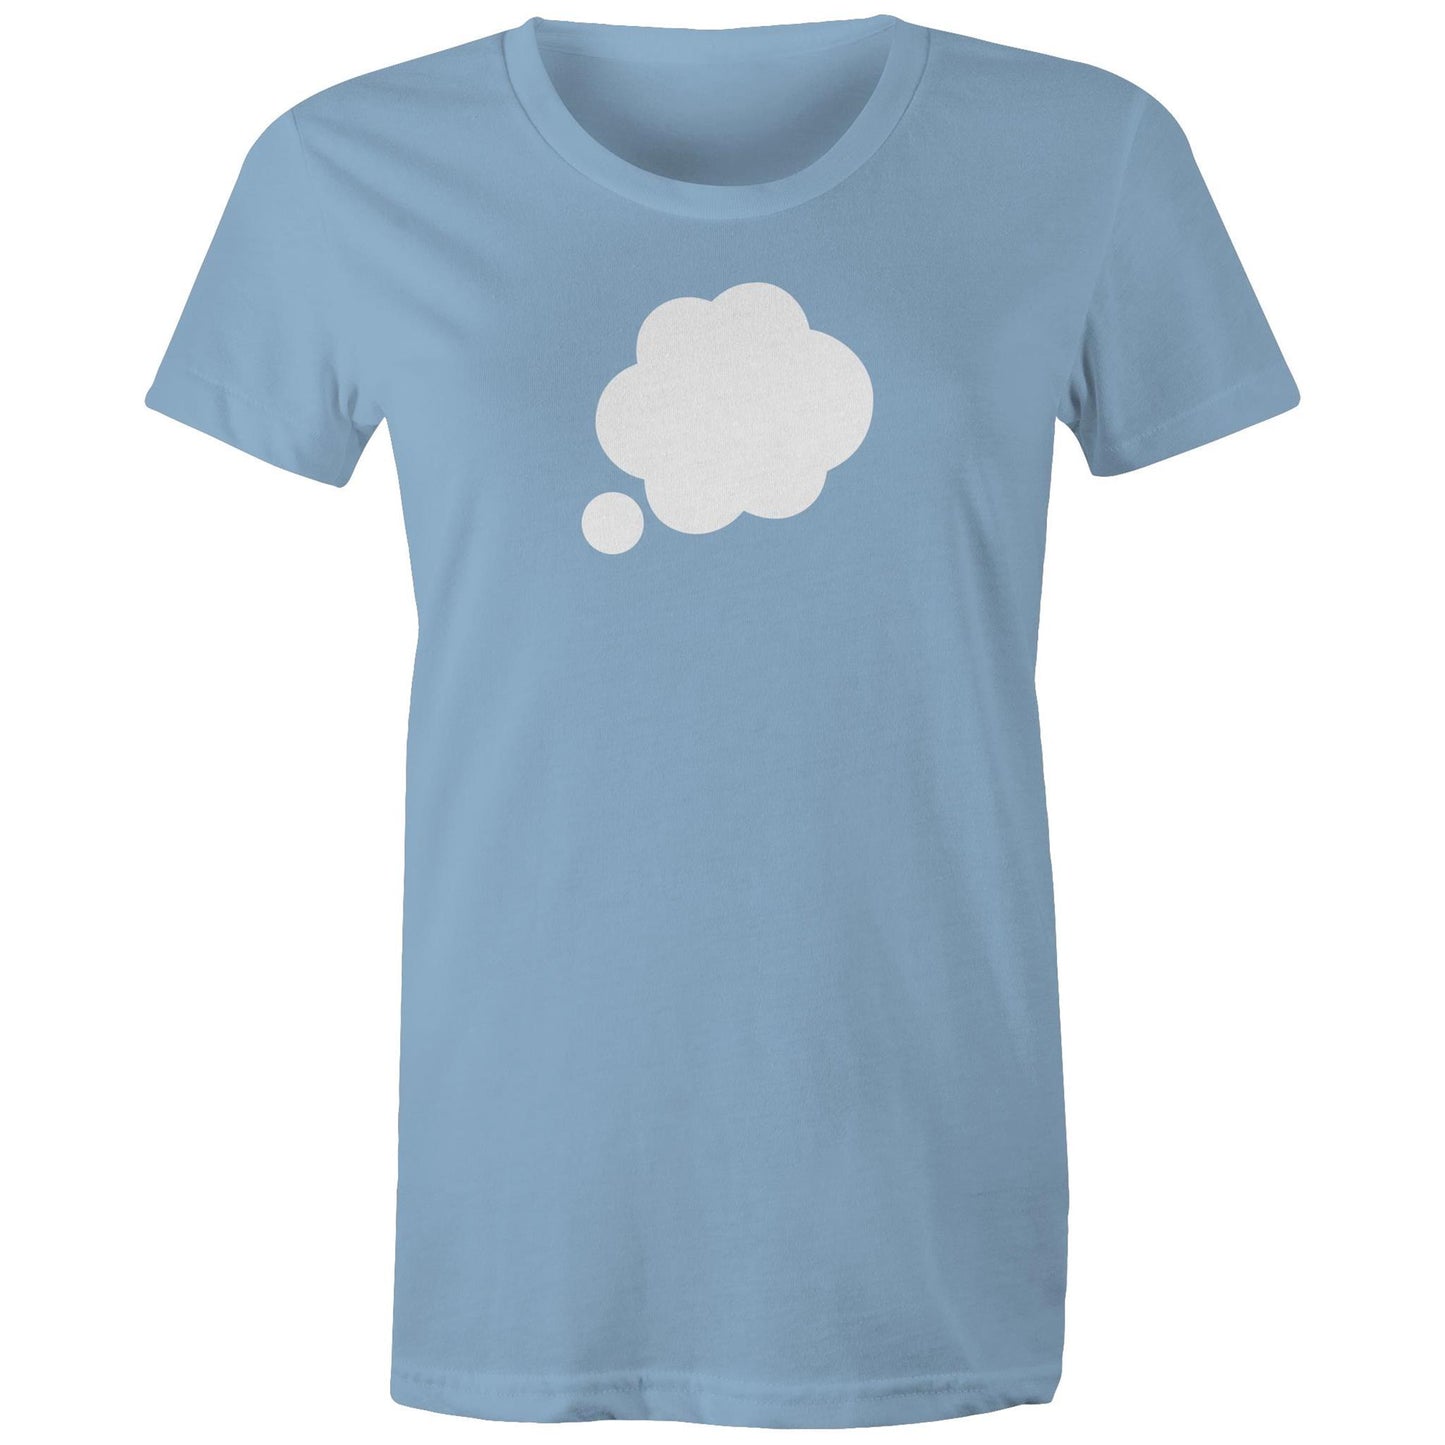 Thought Bubble T Shirts for Women